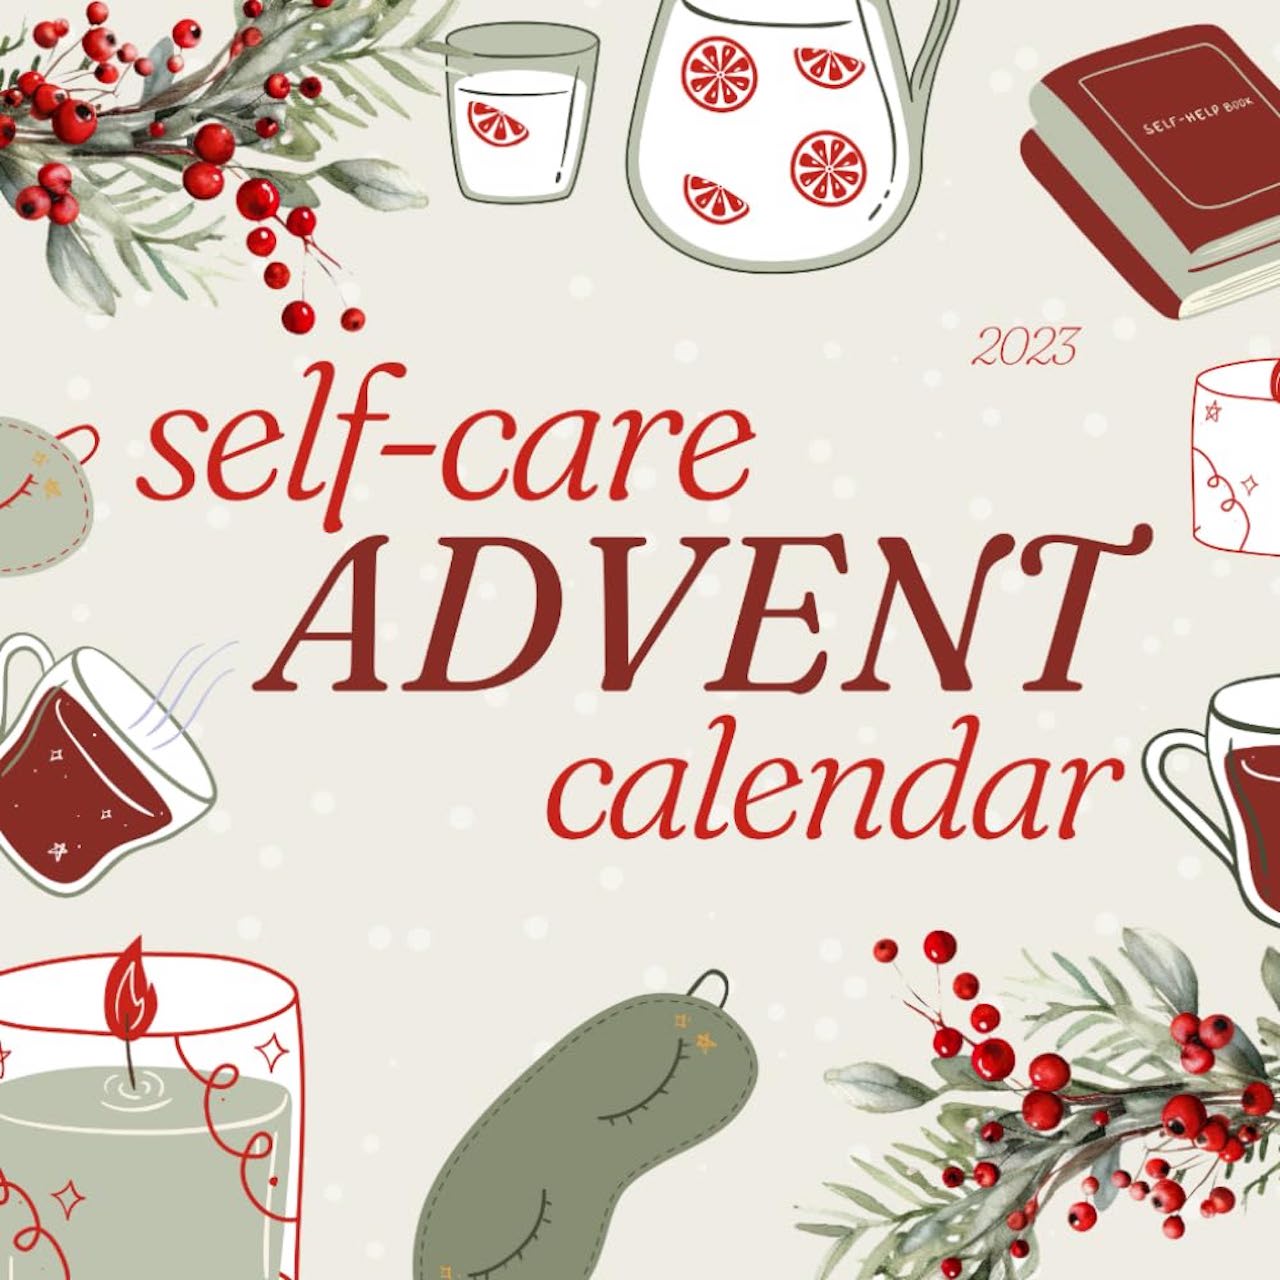 Advent calendars have arrived! The perfect gift for yourself or